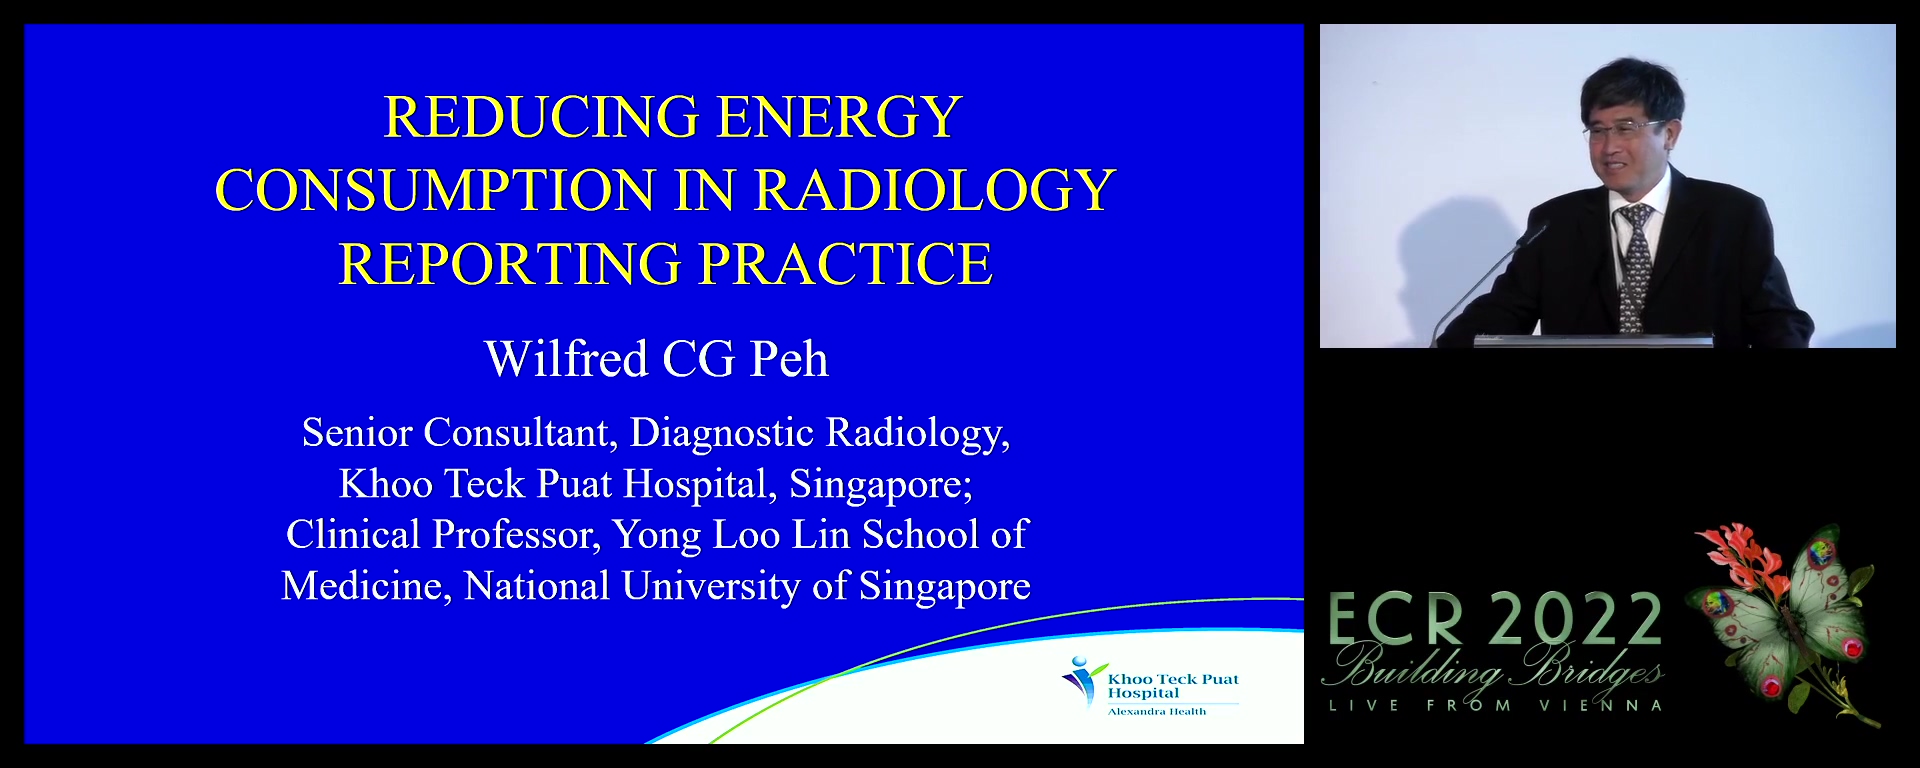 Reducing energy consumption in radiology reporting practice